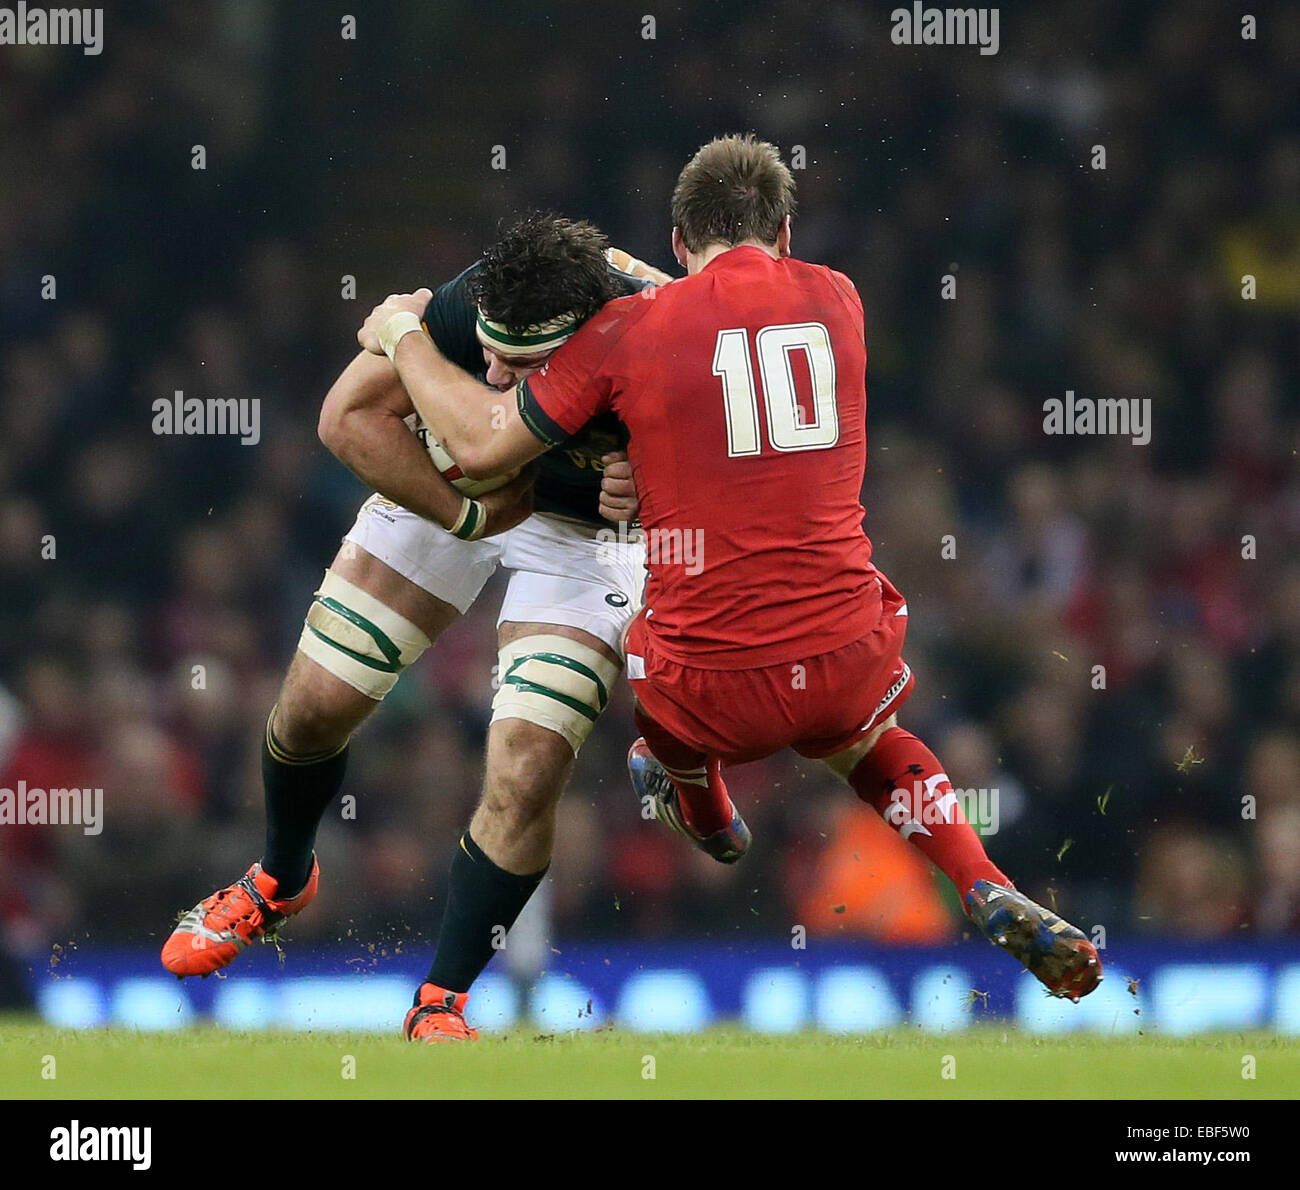 Cardiff, UK. 29th Nov, 2014. Dan Biggar of Wales brings down Marcell Coetzee of South Africa - Autumn Internationals - Wales vs South Africa - Millennium Stadium - Cardiff - Wales - 29th November 2014 - Picture Simon Bellis/Sportimage. Credit:  csm/Alamy Live News Stock Photo